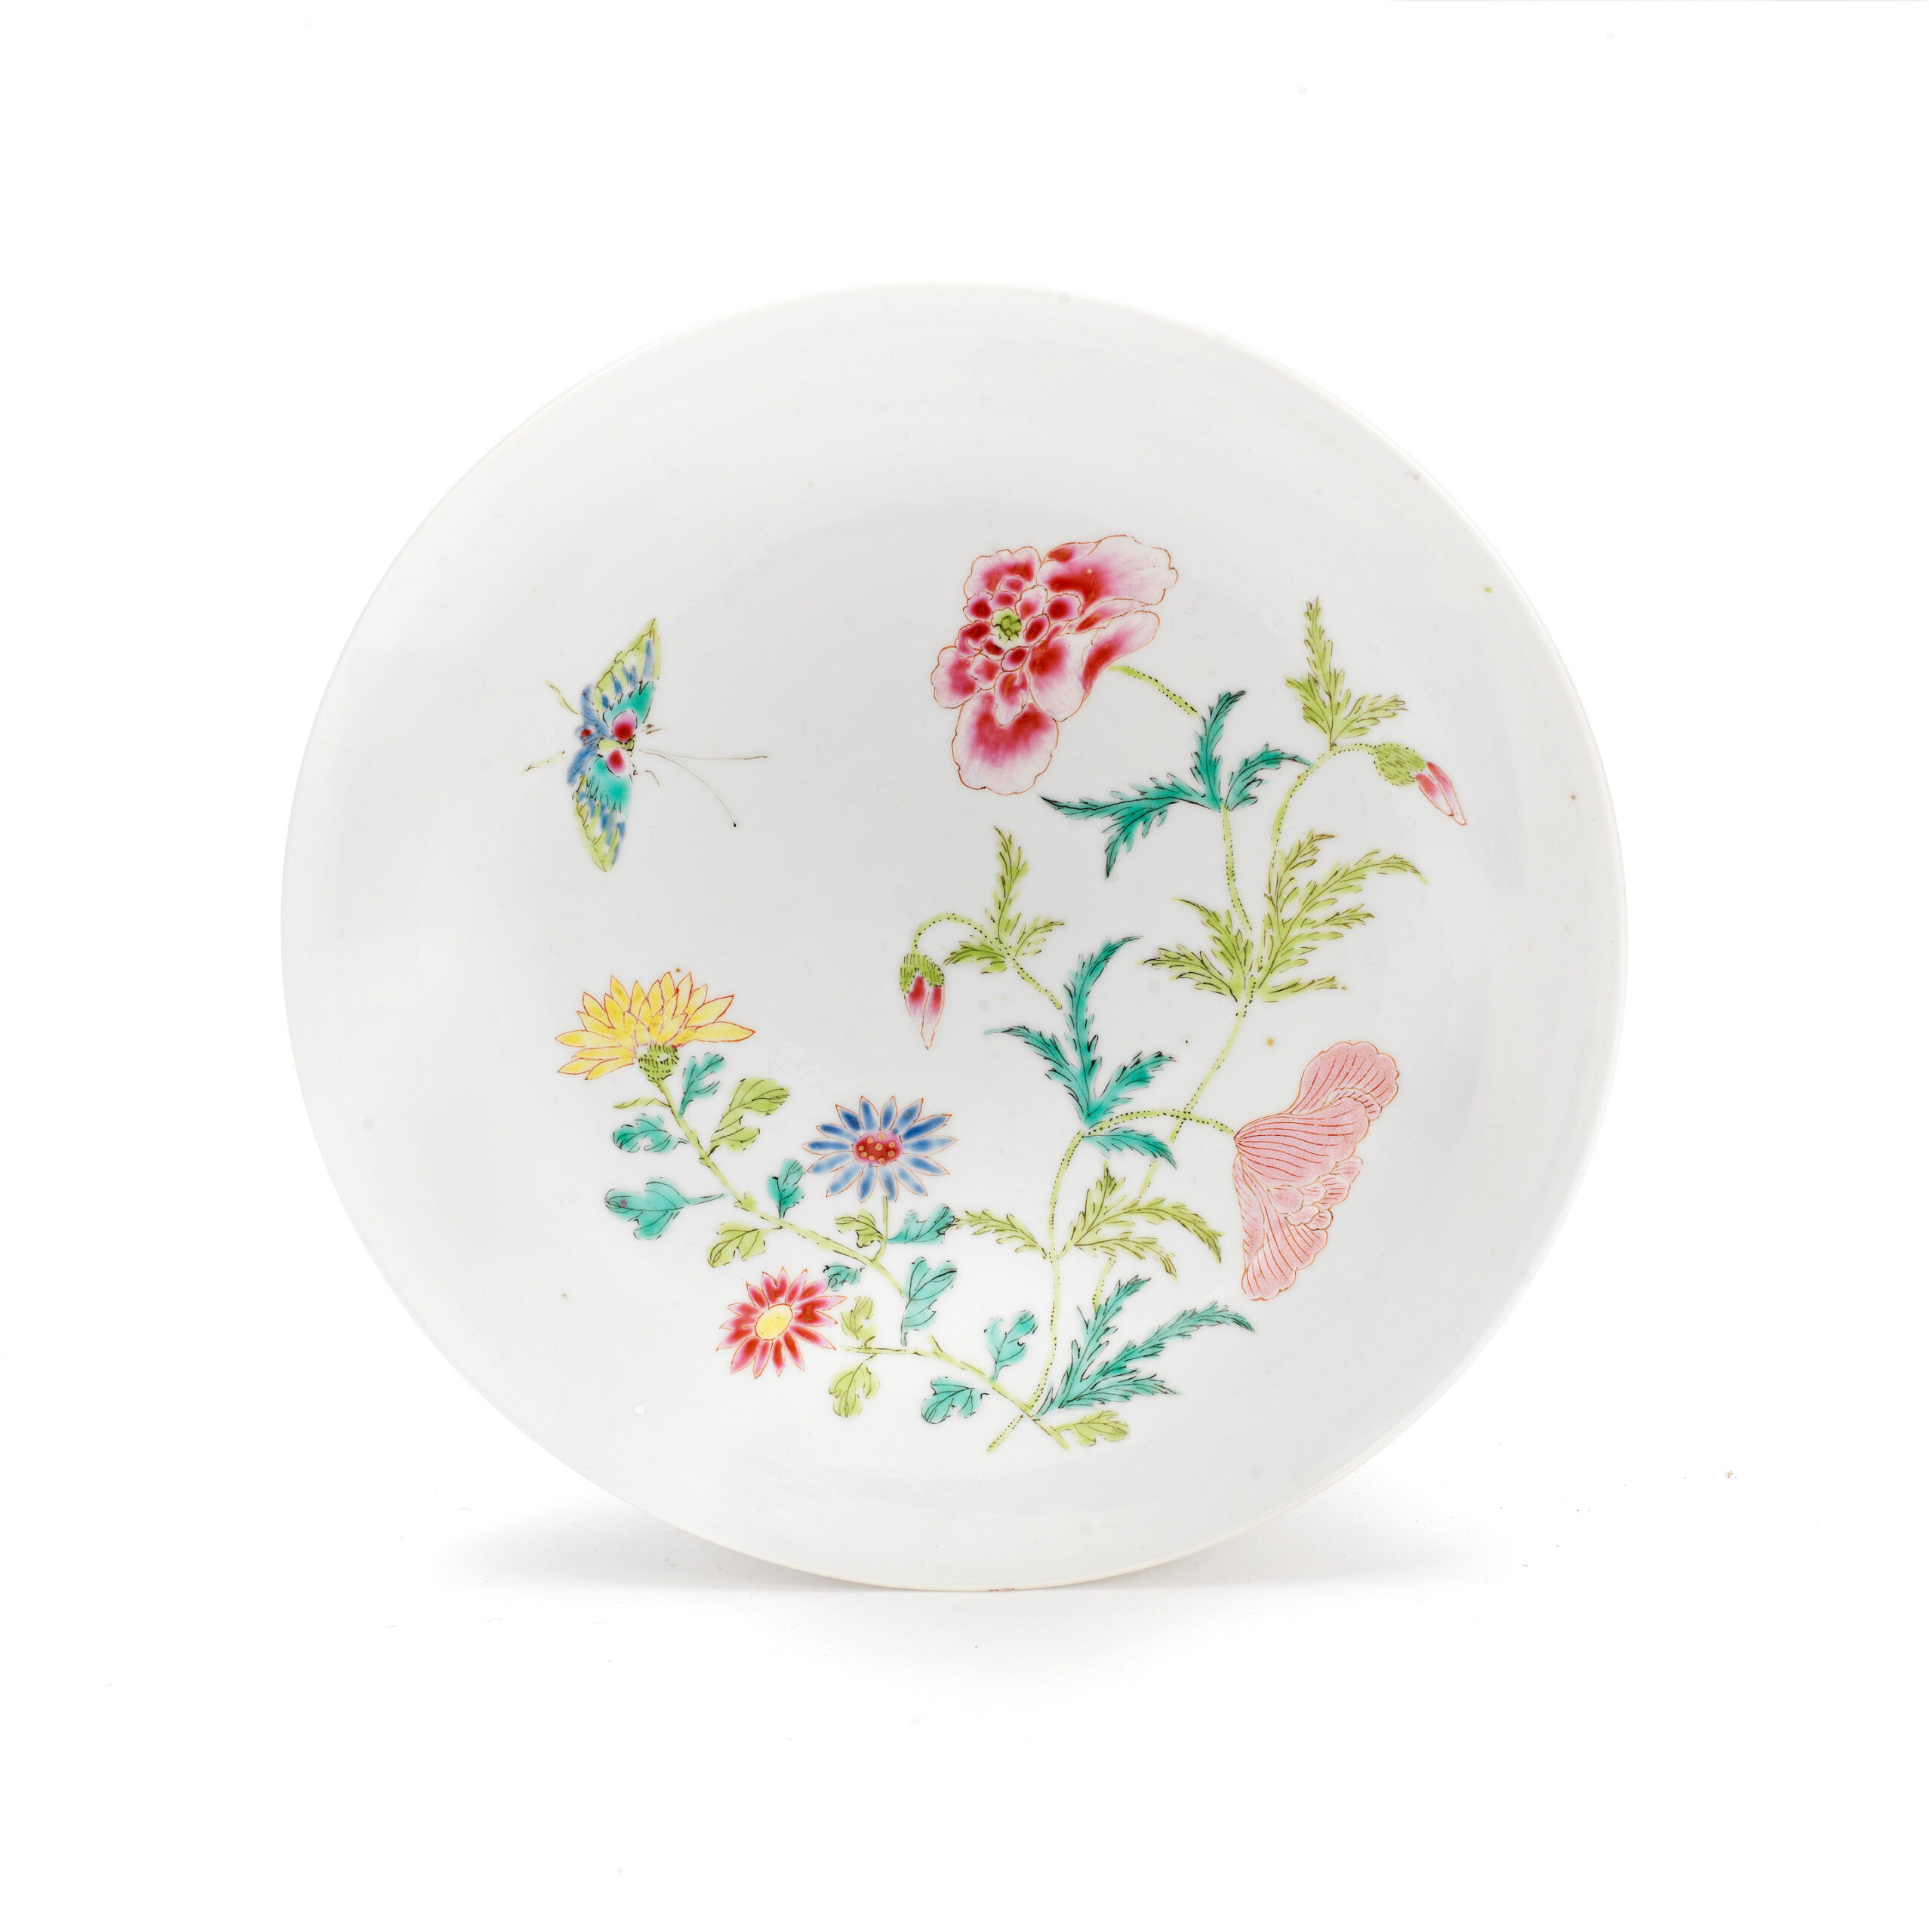 A FAMILE ROSE FLORAL DISH, Yongzheng six-character mark and of the period, Lot 148, Asian Art, 9-10 May